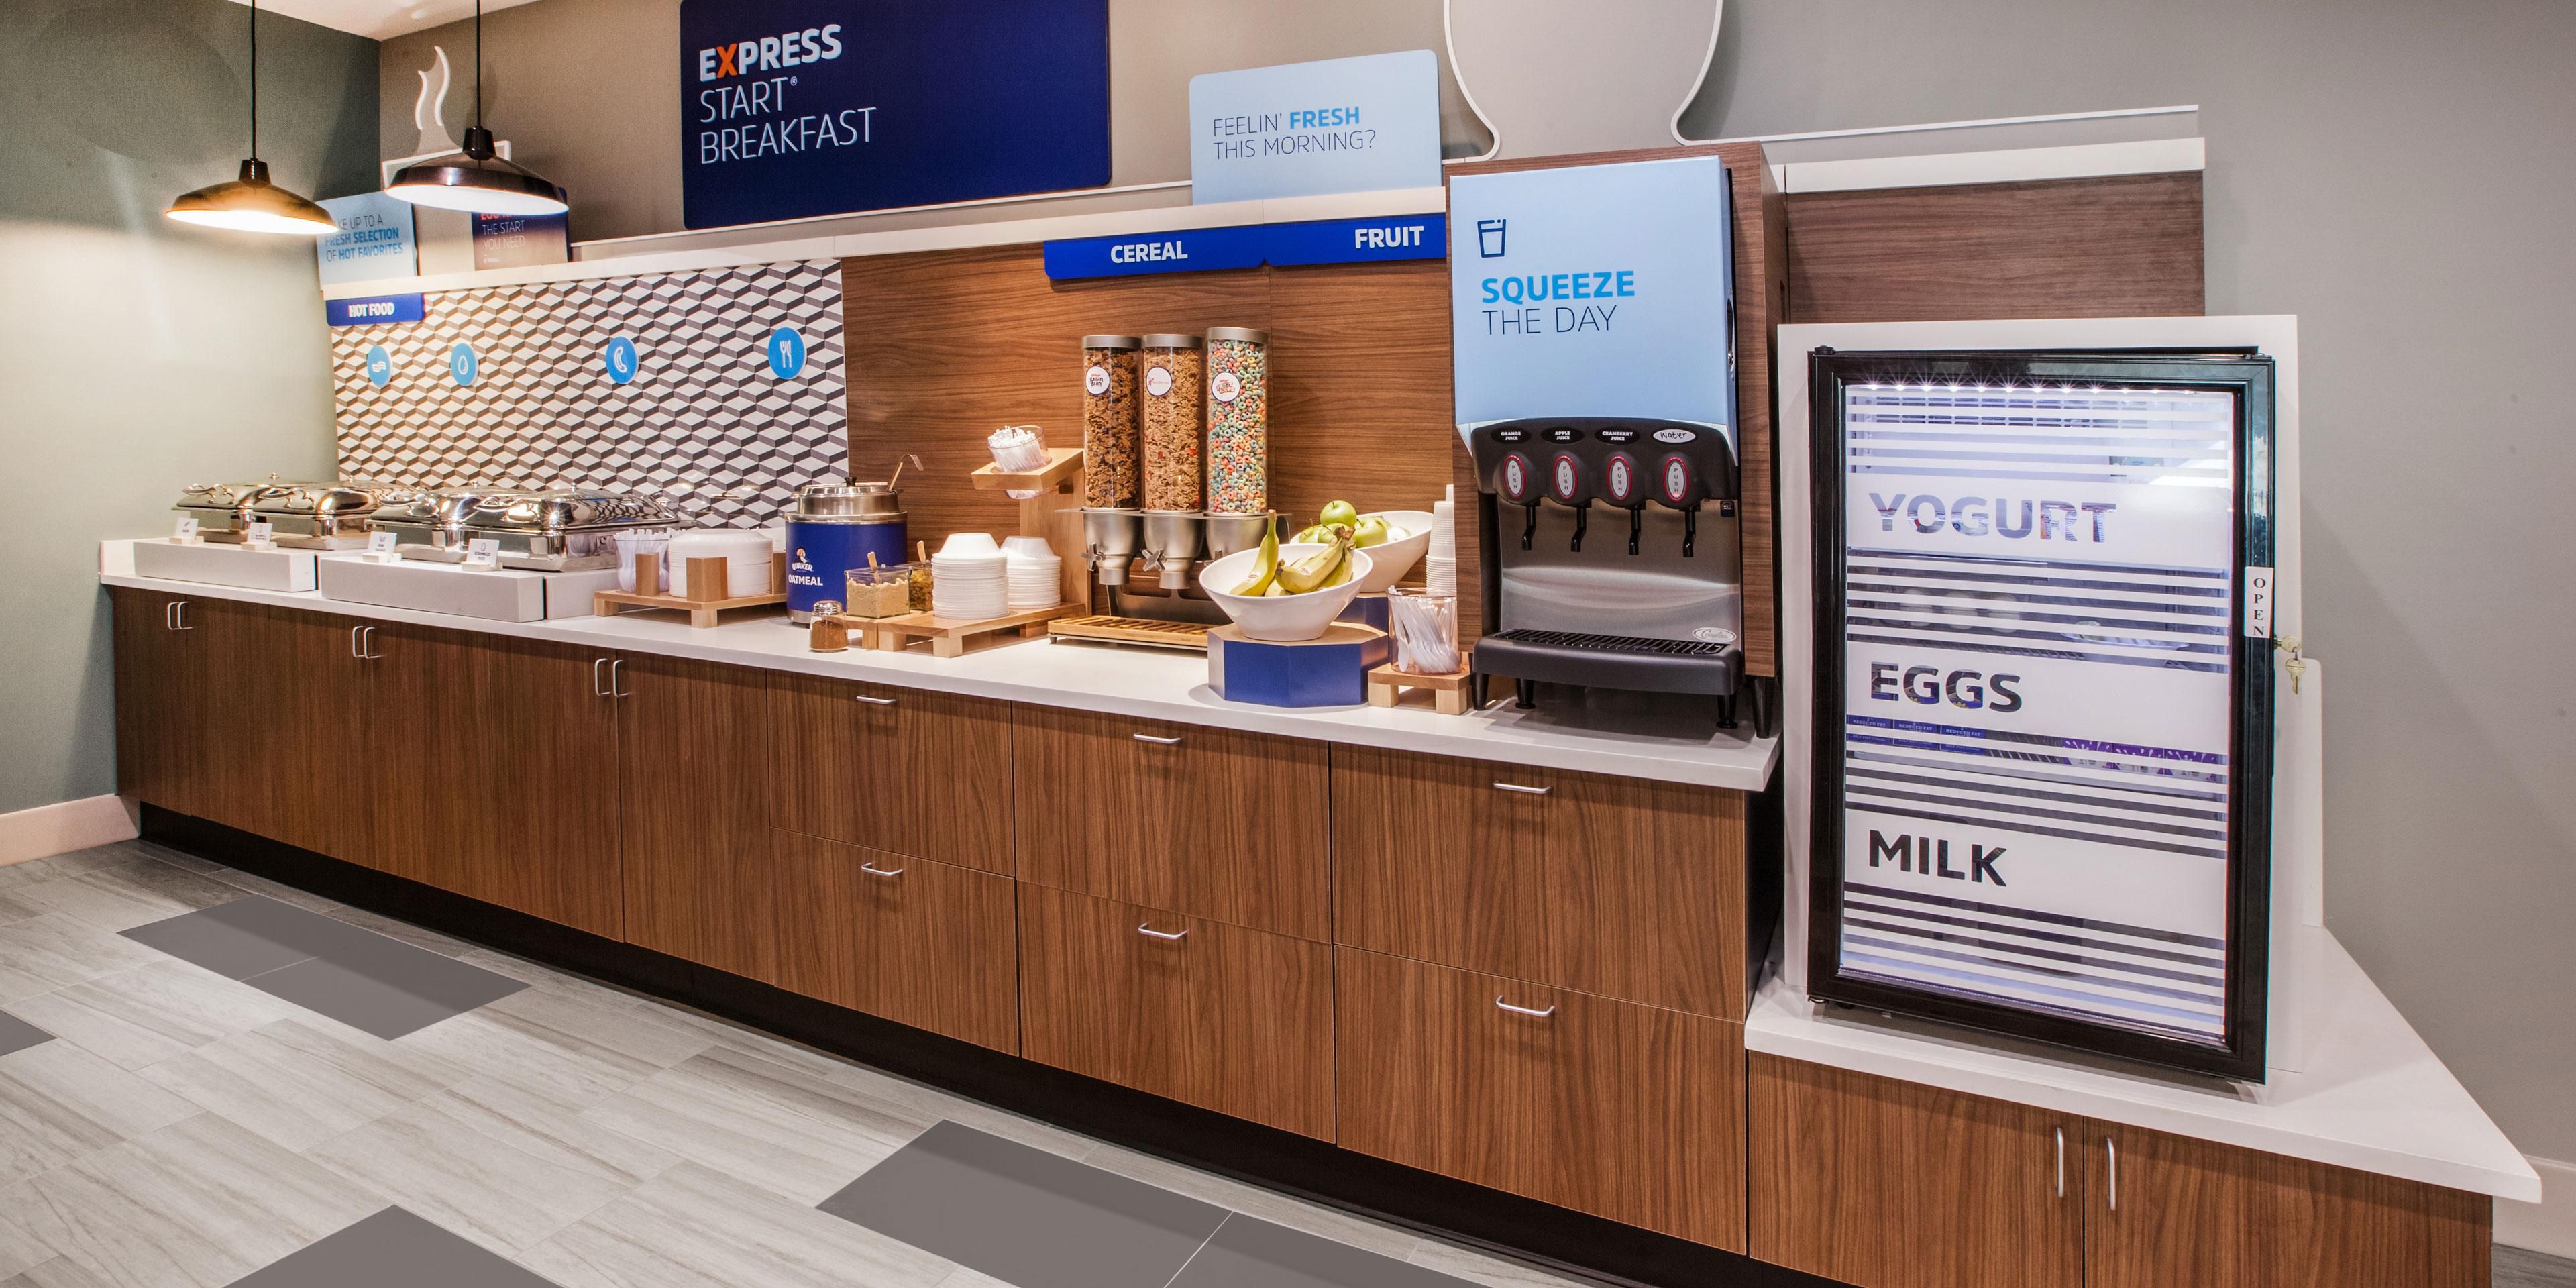 Start the morning off right with our complimentary Express Start breakfast. Our hotel is offering a hot breakfast bar with safety enhancements and includes a variety of hot and continental breakfast items.